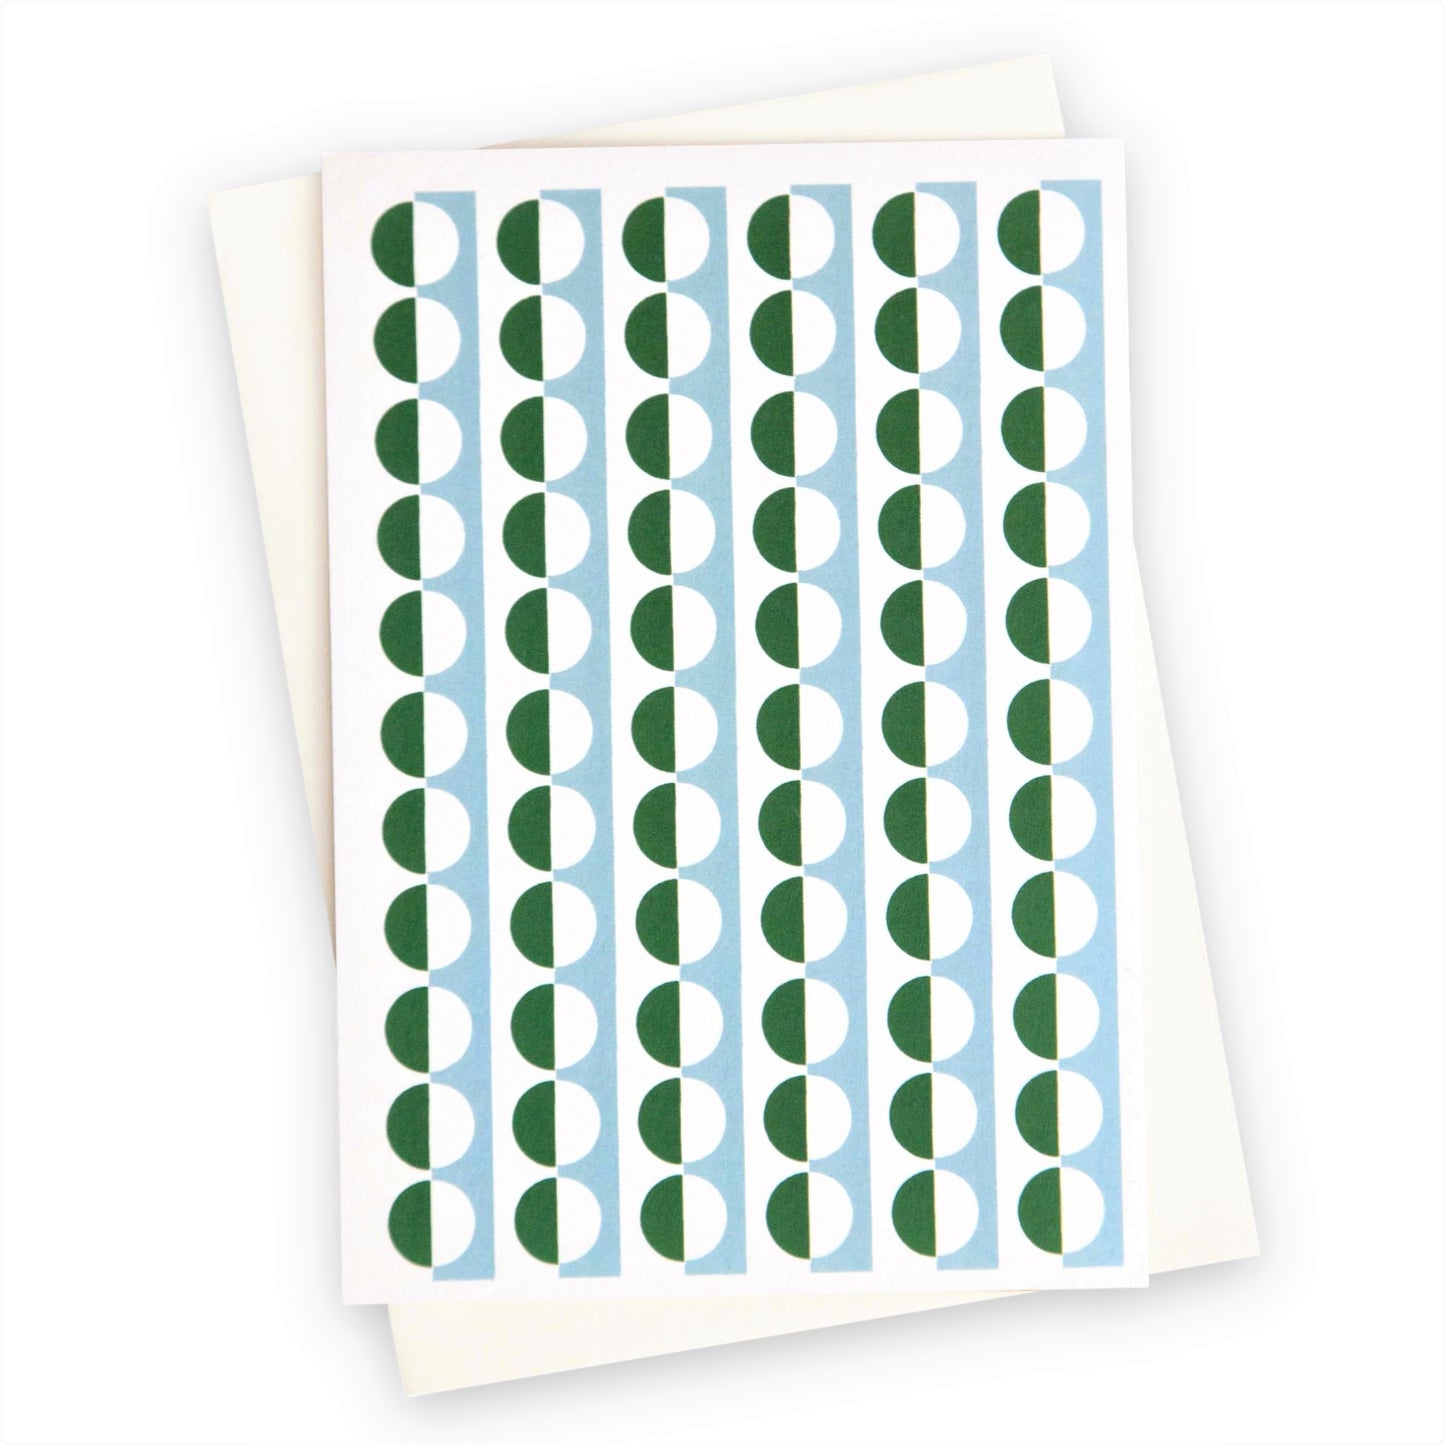 greetings card with abstract circle pattern in green and blue by Ola Studio